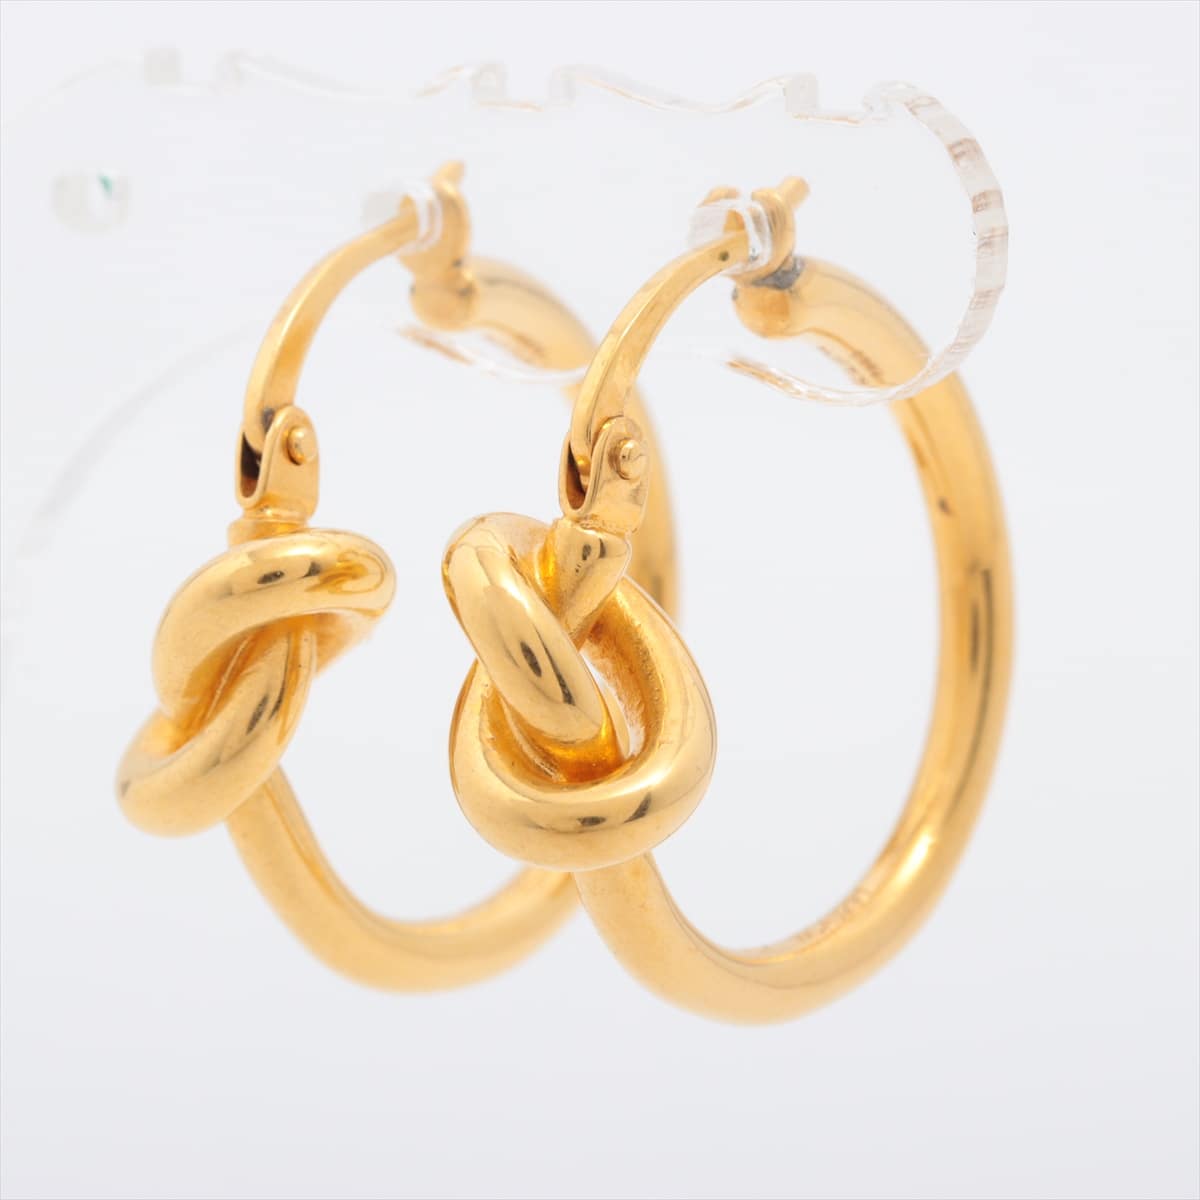 CELINE Knot Piercing jewelry (for both ears) GP Gold